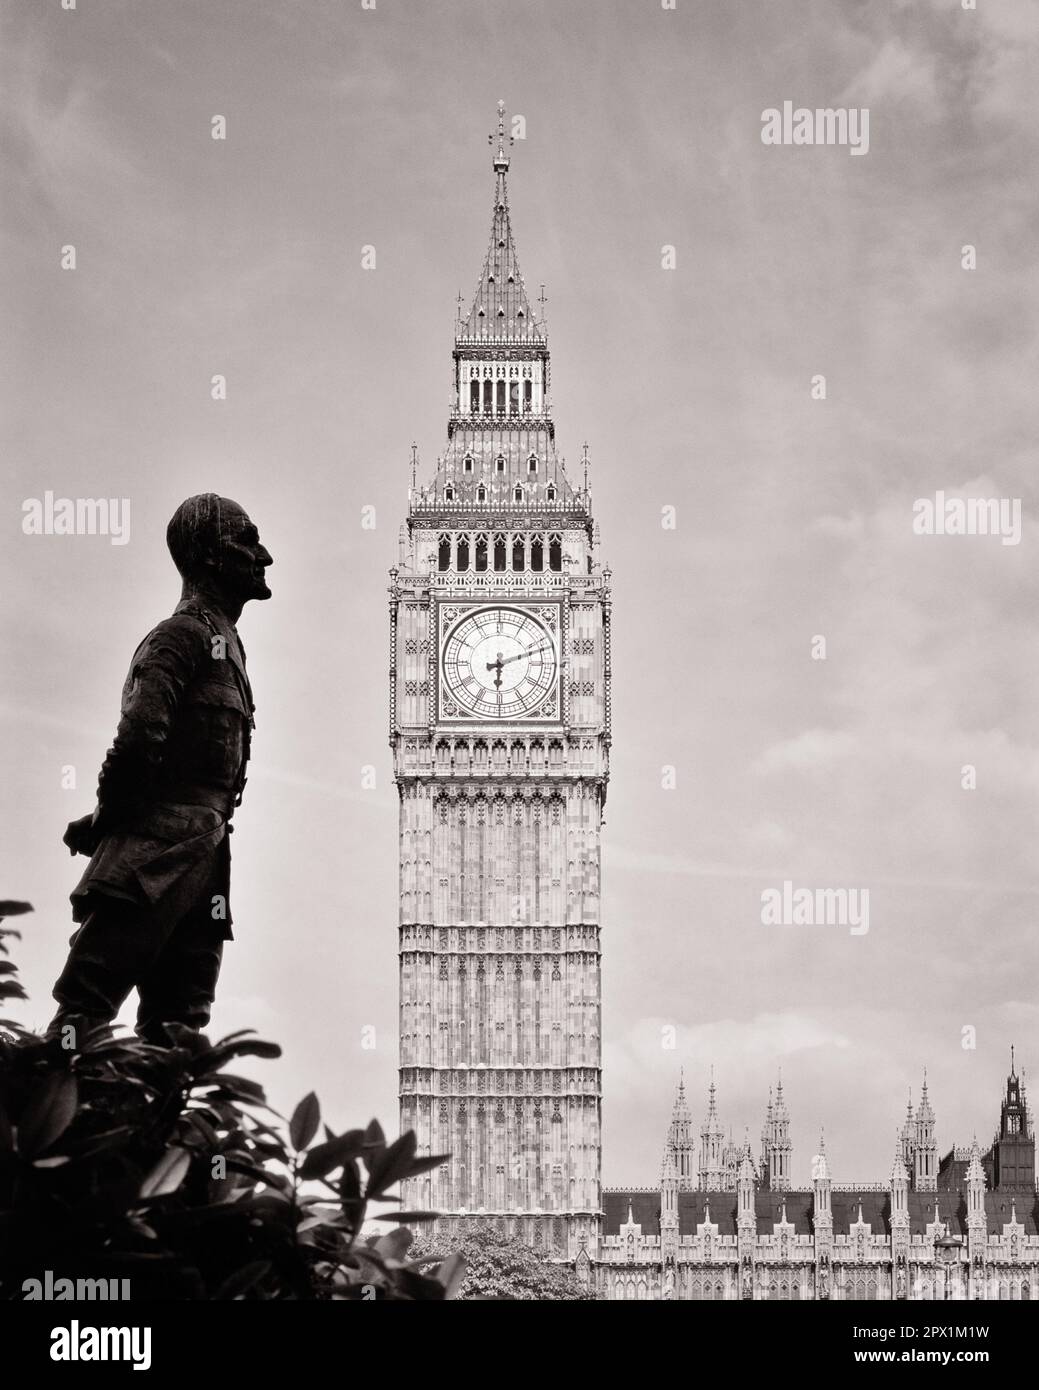 1970s BIG BEN HOUSES OF PARLIAMENT STATUE OF JAN CHRISTIAN SMUTS SOUTH AFRICAN STATESMAN IN PARLIAMENT SQUARE LONDON ENGLAND - r22401 HAR001 HARS CITIES GOTHIC REVIVAL SOUTH AFRICA SYMBOLIC CONCEPTS MILITARY LEADER NEO-GOTHIC STATESMAN BLACK AND WHITE CLOCK TOWER GREAT BRITAIN HAR001 ICONIC OLD FASHIONED PARLIAMENT REPRESENTATION UNITED KINGDOM Stock Photo